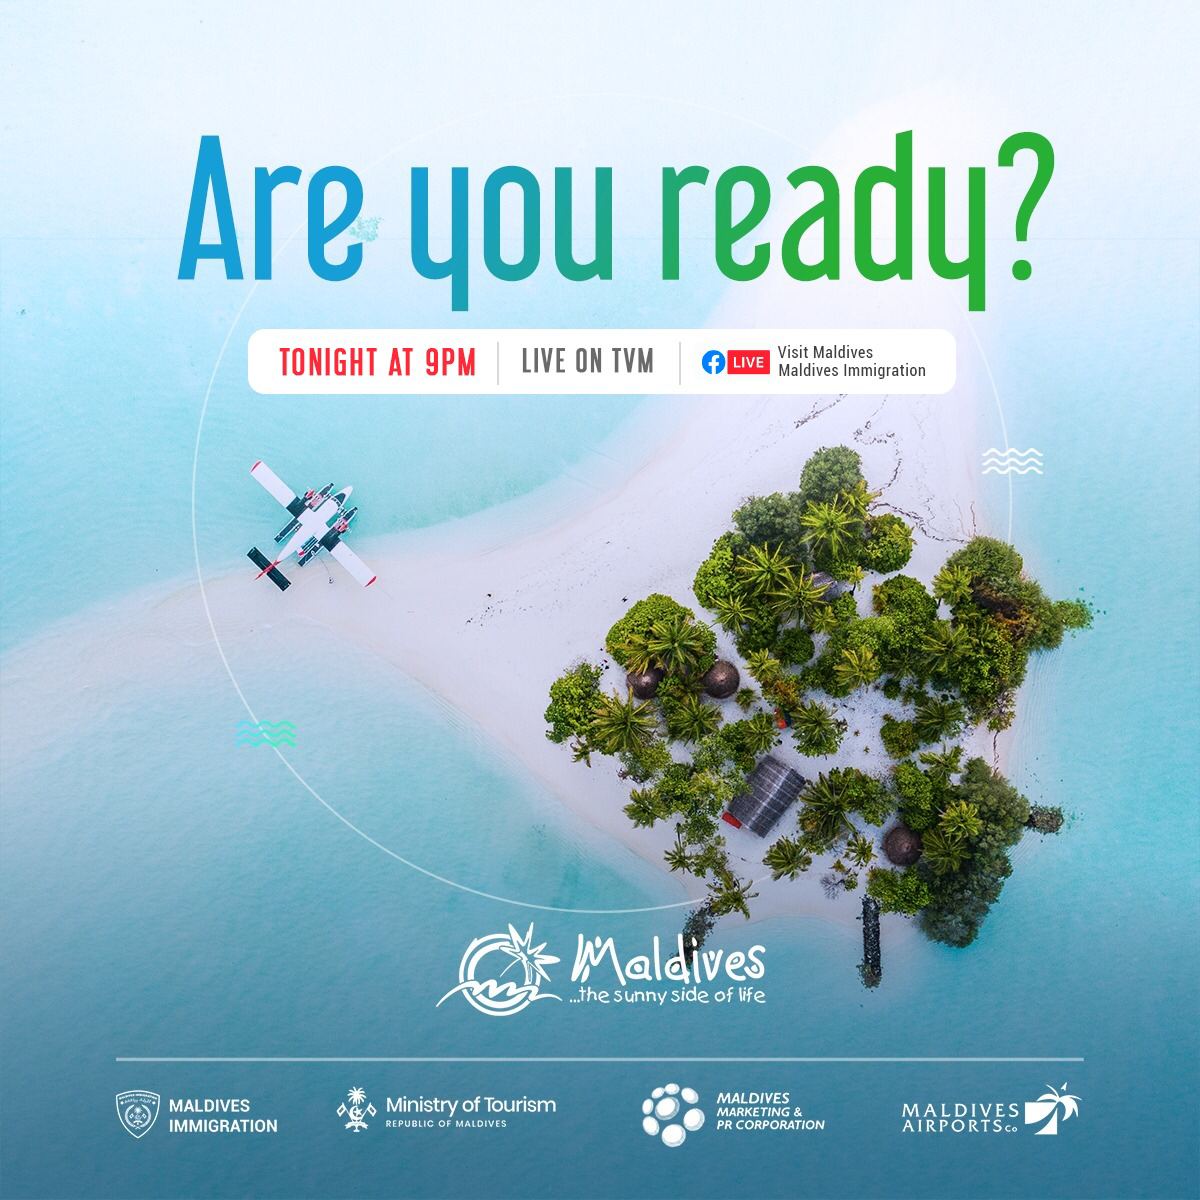 During the event to mark the World Tourism Day 2020, a special program will be unveiled tonight.

#WTD2020
#VisitMaldives
#RediscoverMaldives